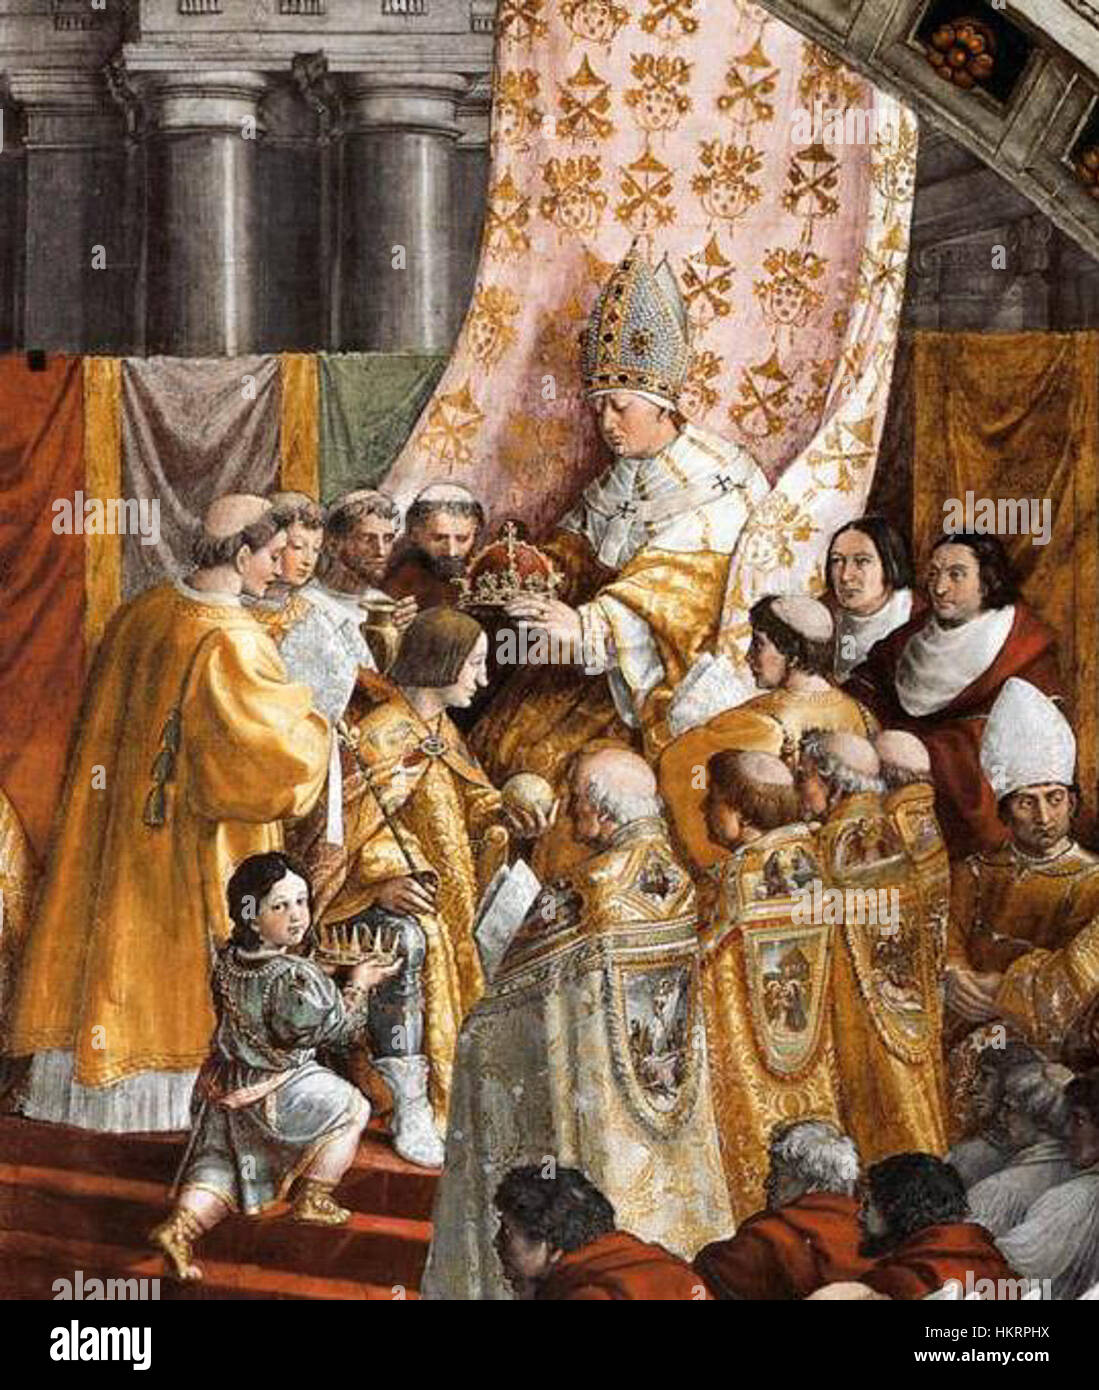 The Significance of the Coronation of Charlemagne